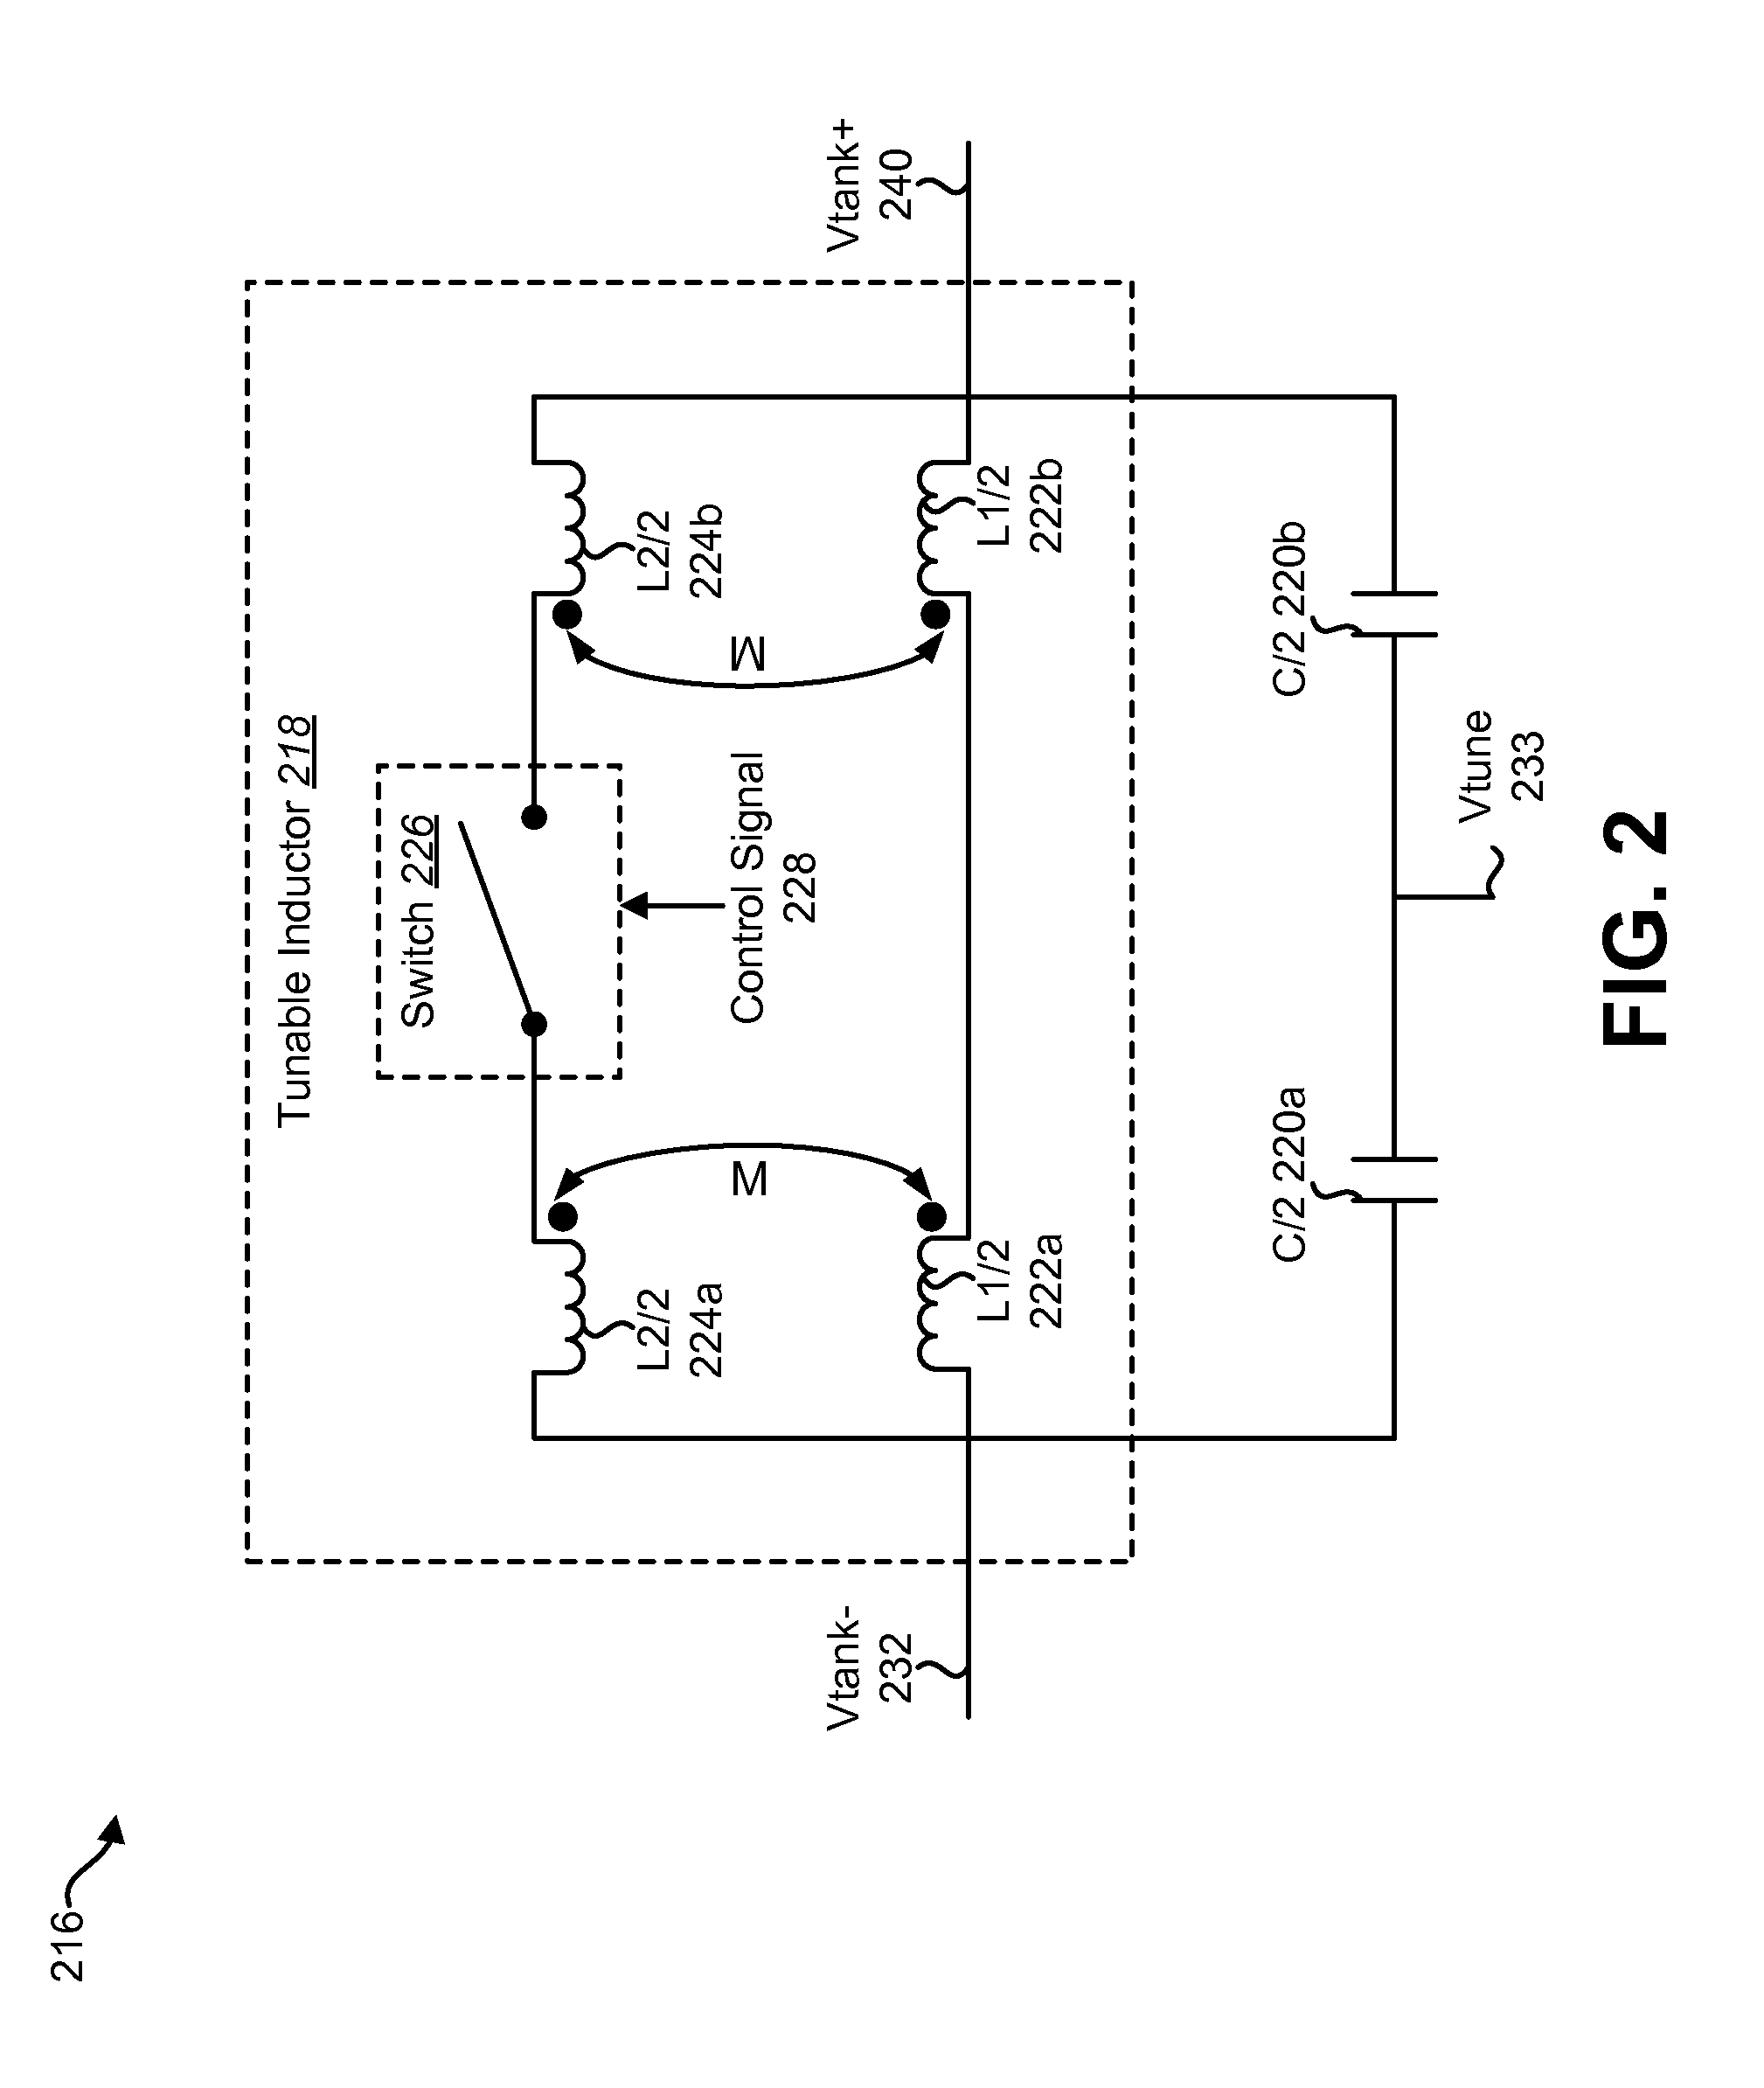 Tunable inductor circuit